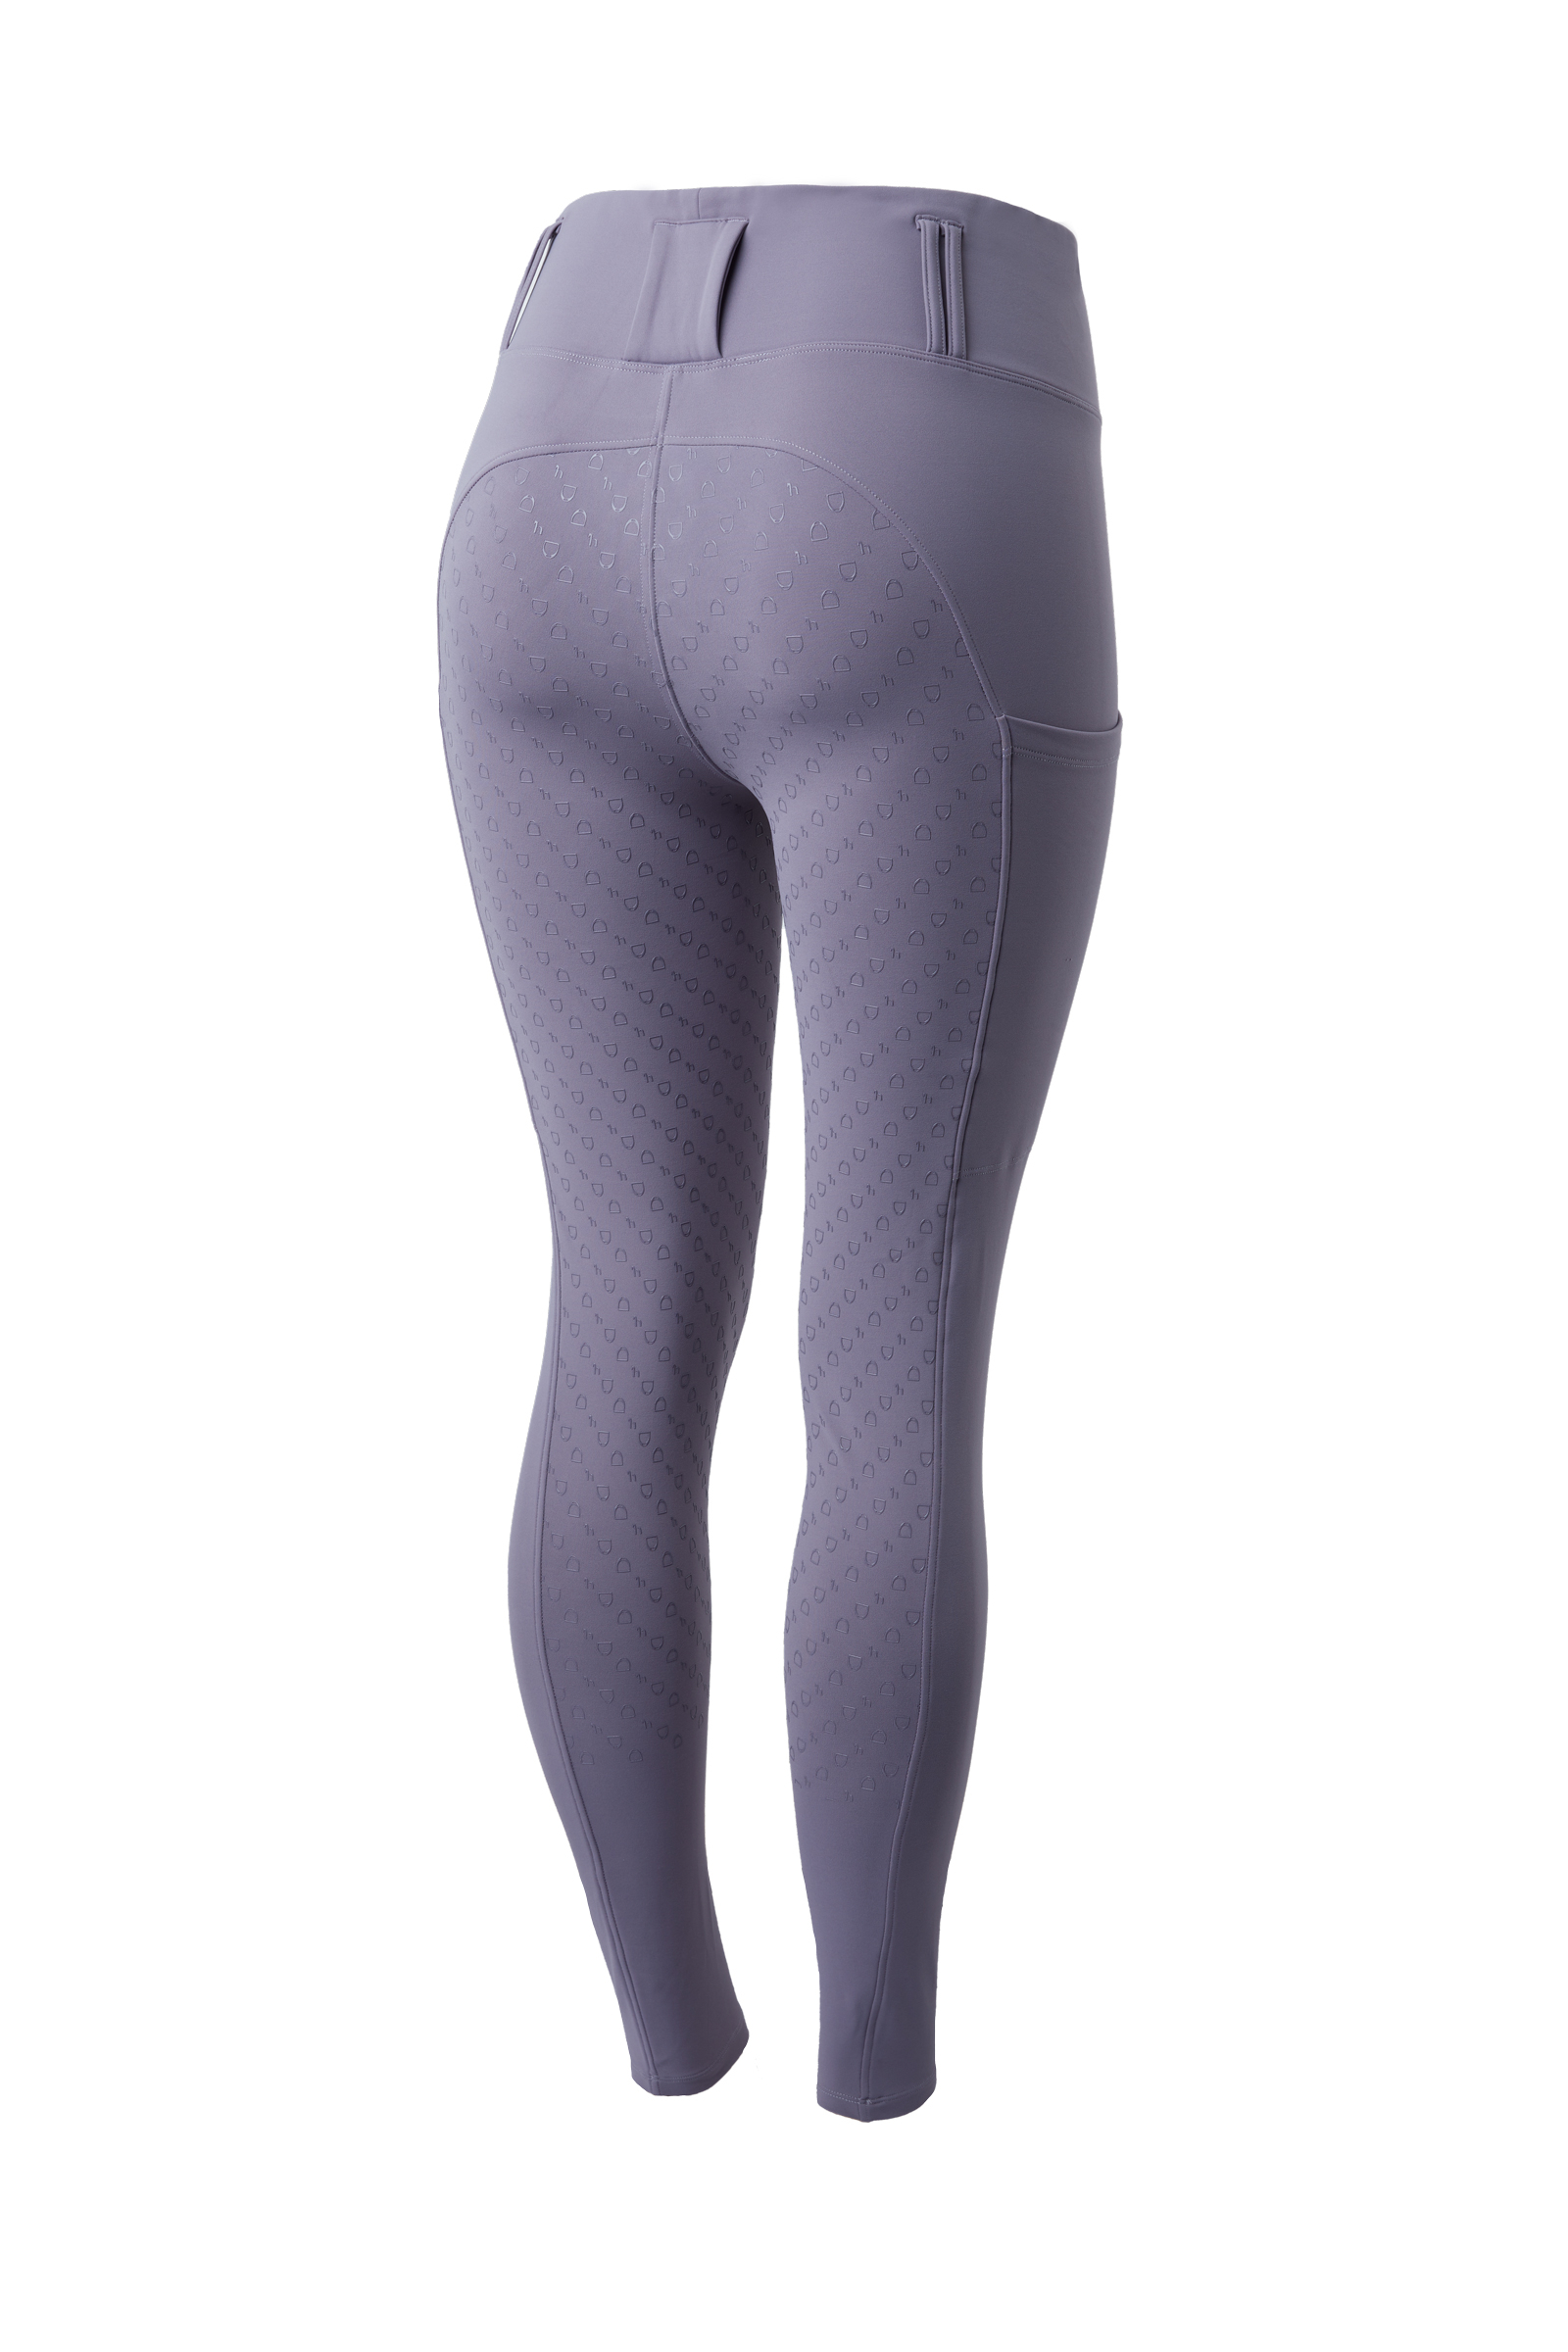 Buy PS of Sweden Emina Women's Riding Tights